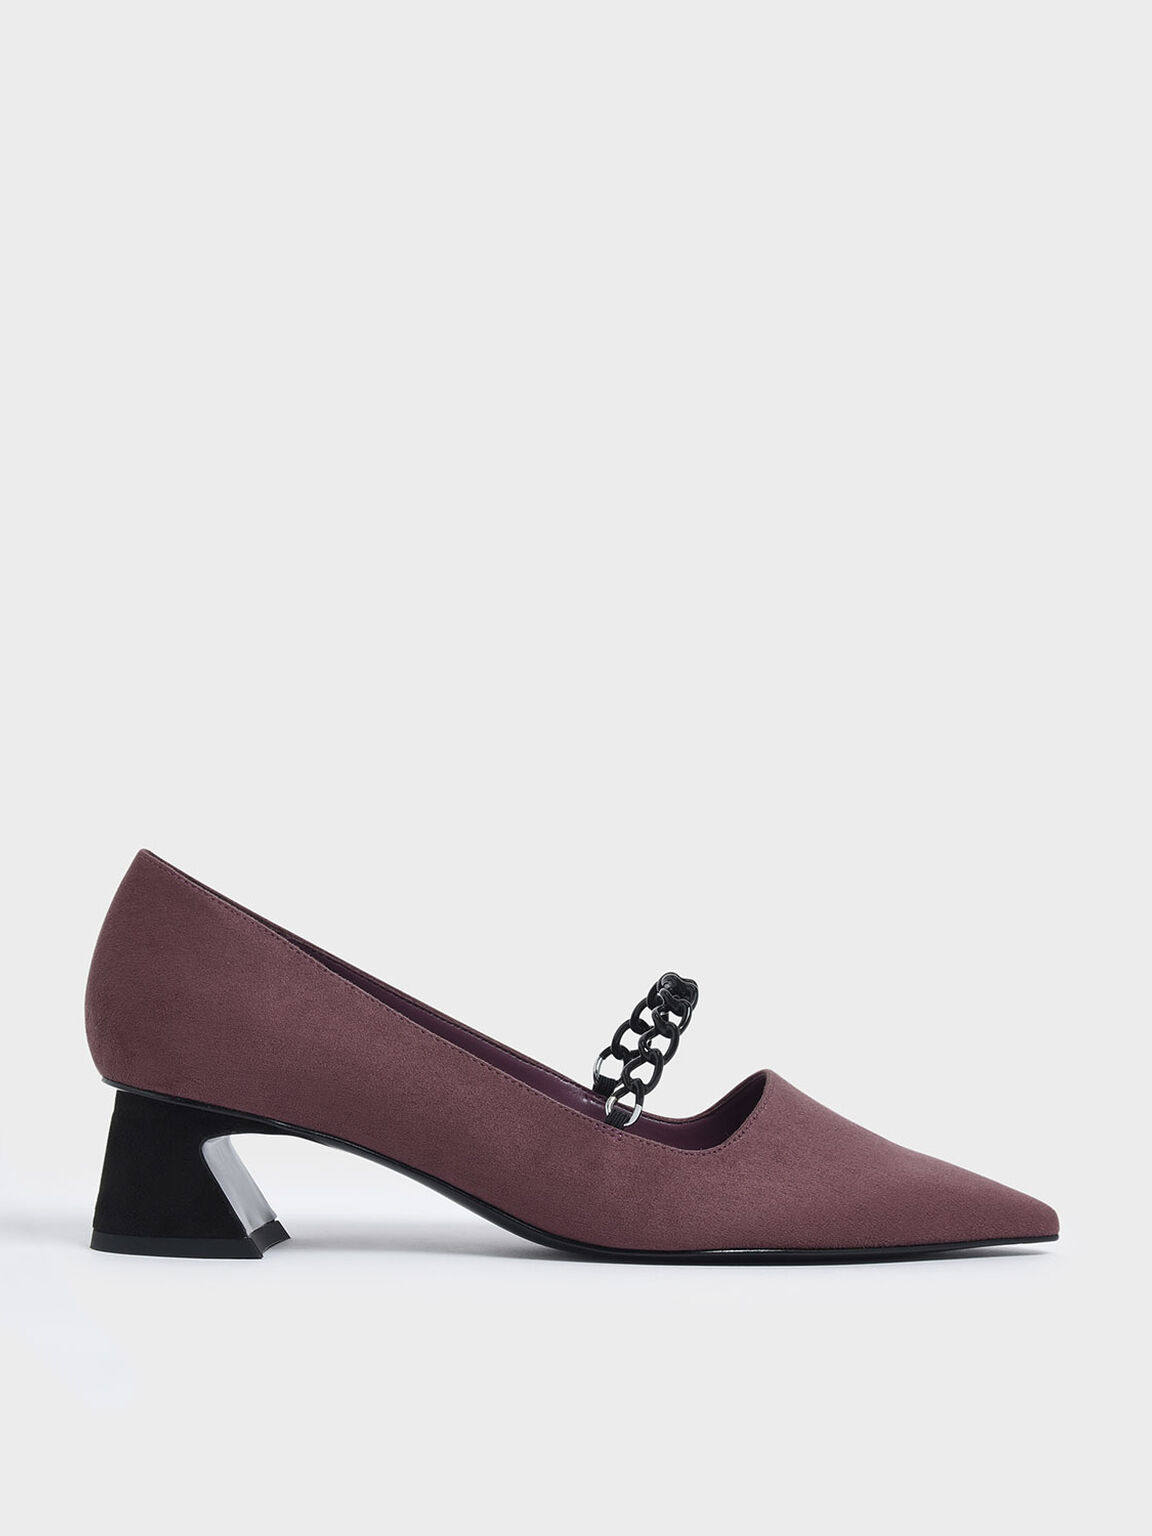 Chain Strap Curved Block Heel Mary Jane Pumps, Mauve, hi-res